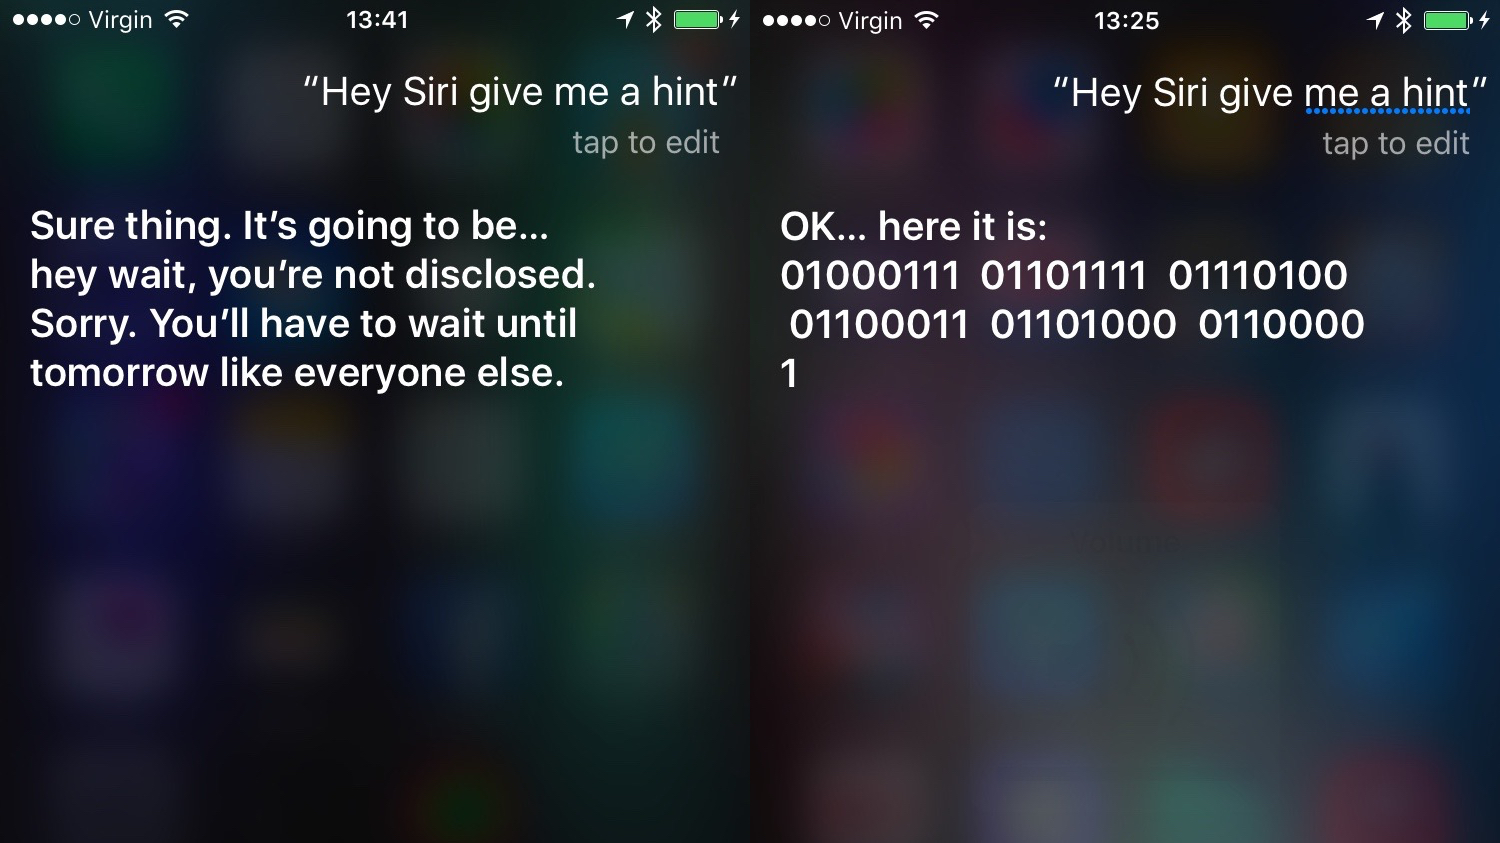 Siri giving some more 'hints' ahead of Apple event tomorrow - 9to5Mac